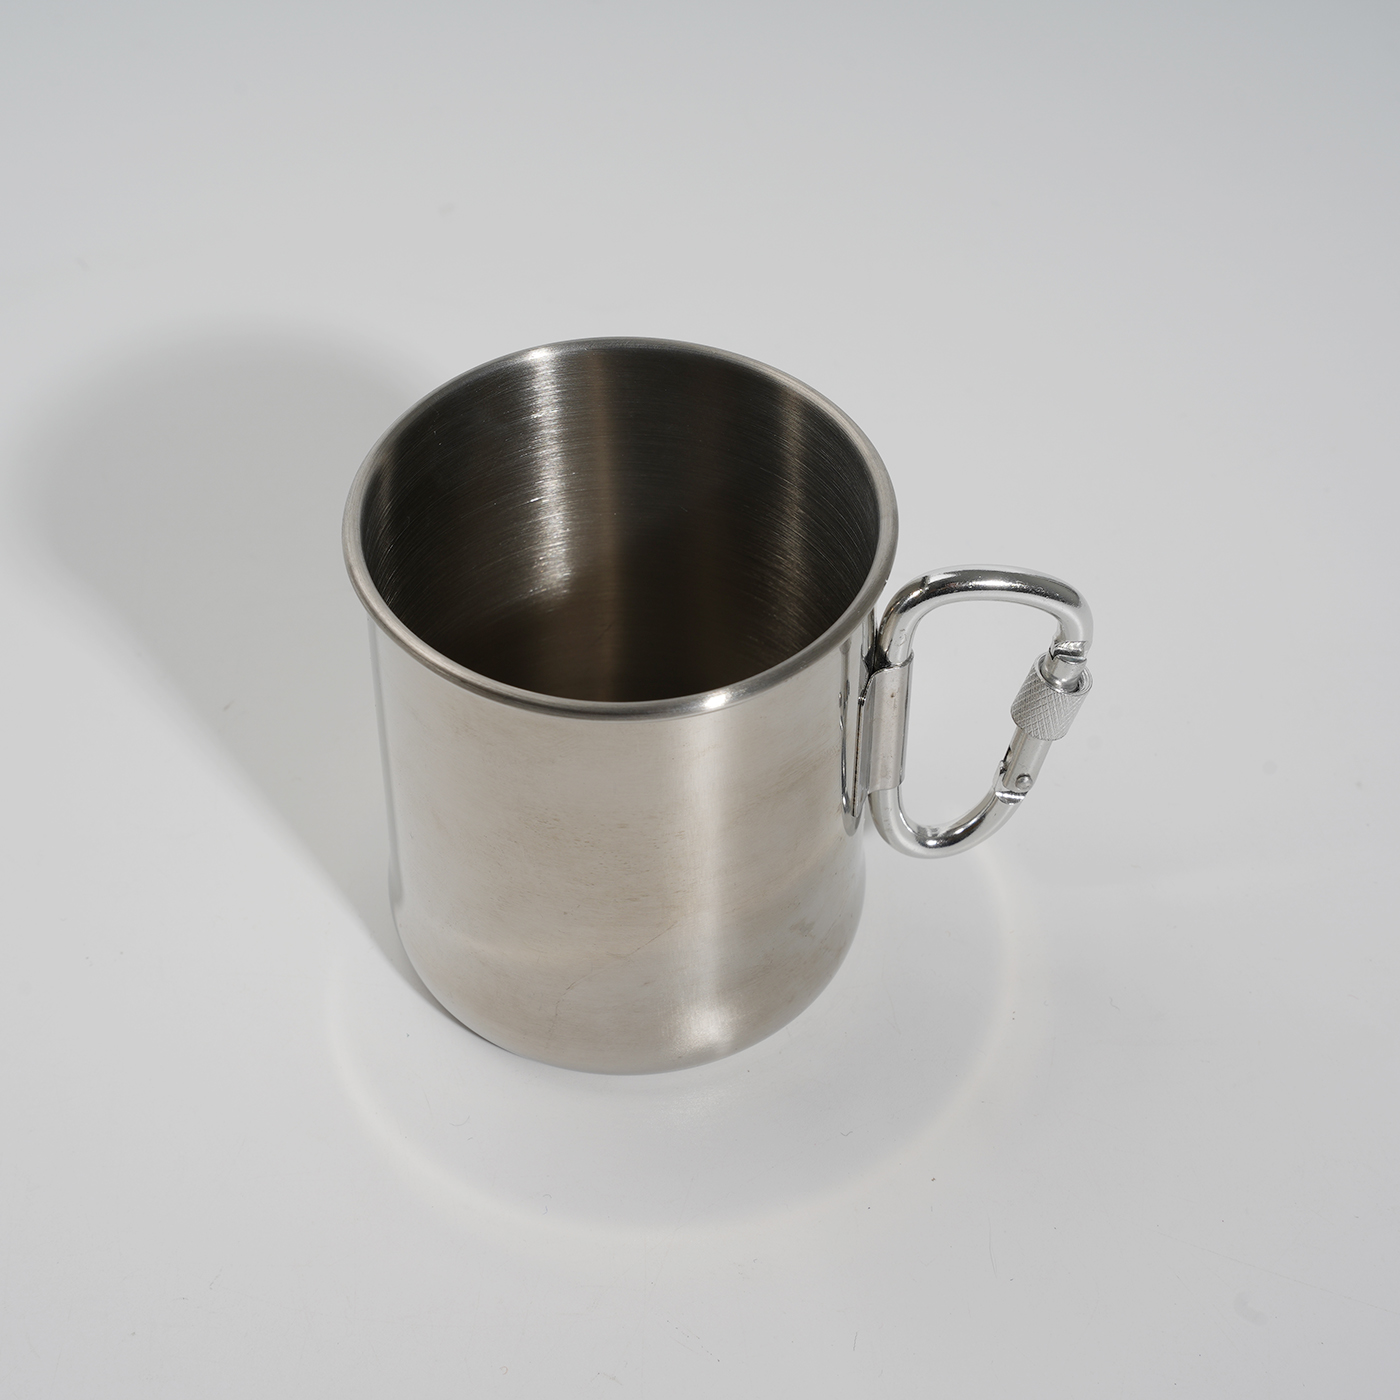 Stainless Steel Camping Mug With Carabiner Handle3